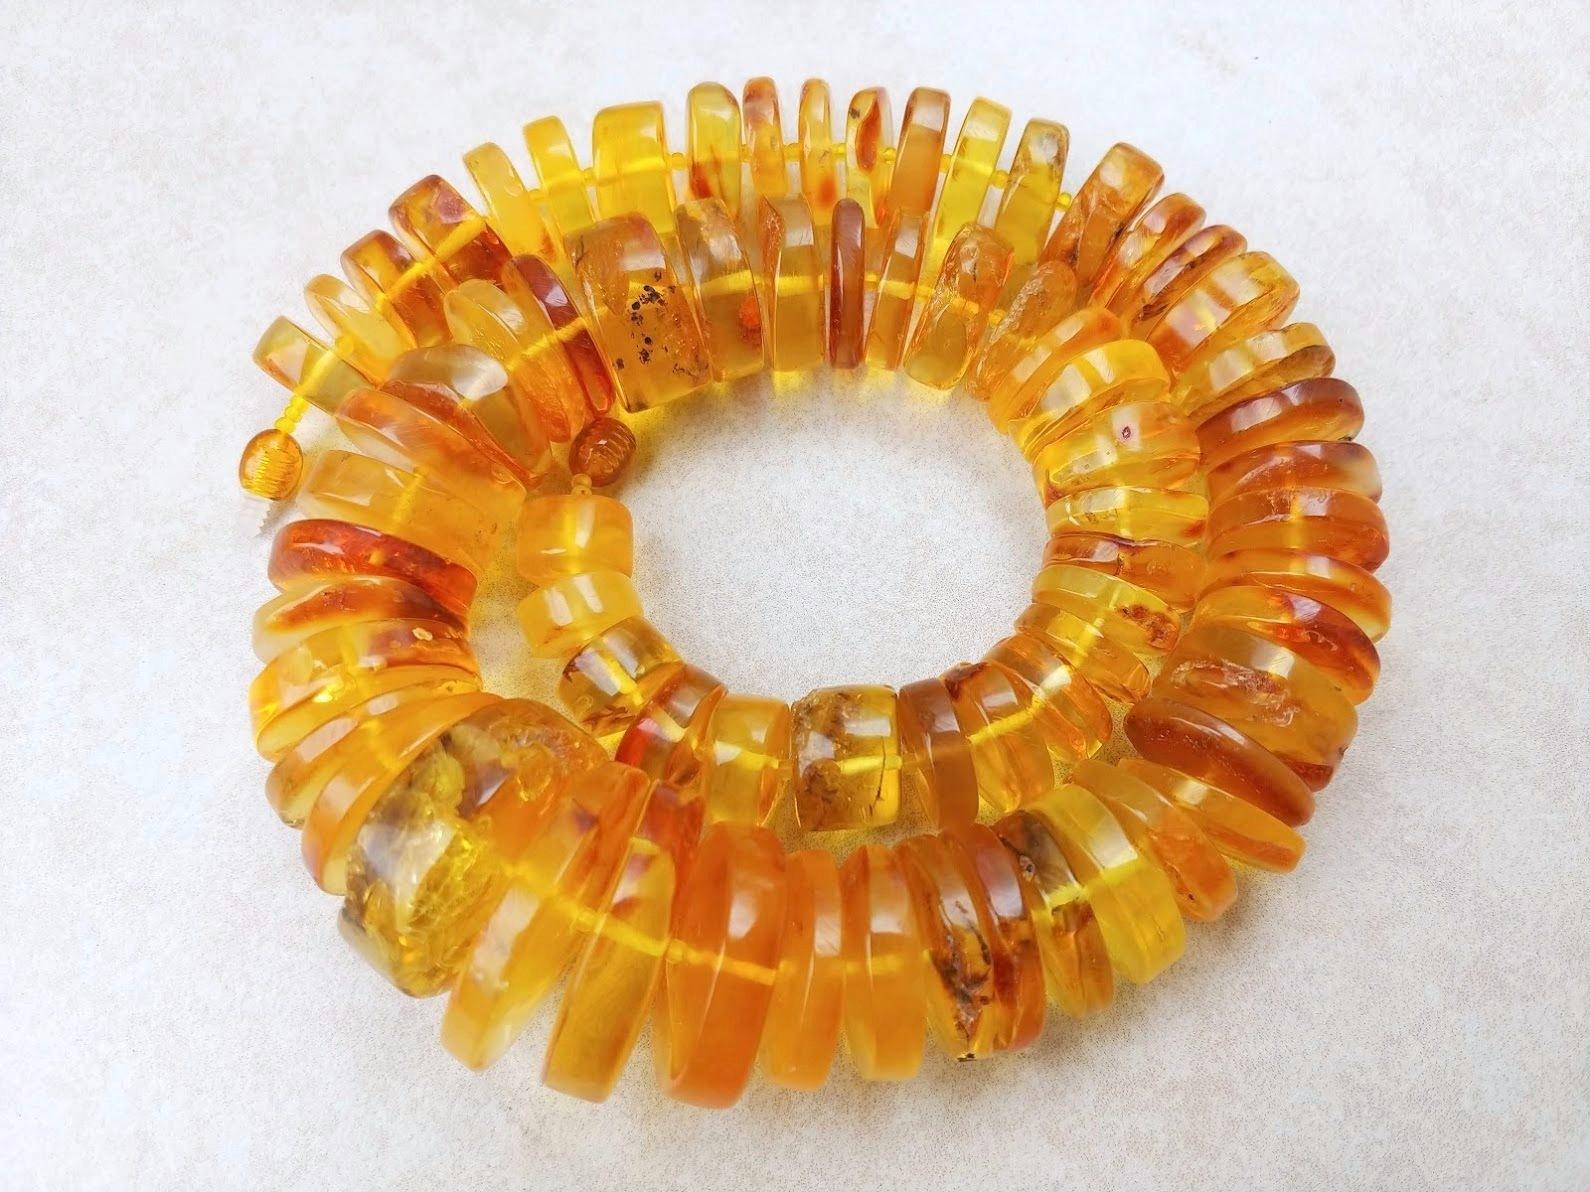 The length of the necklace is 21 inches (53cm). Live chopped pieces disks of raw Baltic amber. The size varies from 15 to 32mm.
The color of amber is transparent, honey.
The color is authentic and natural.
100% Natural Baltic Healing amber.